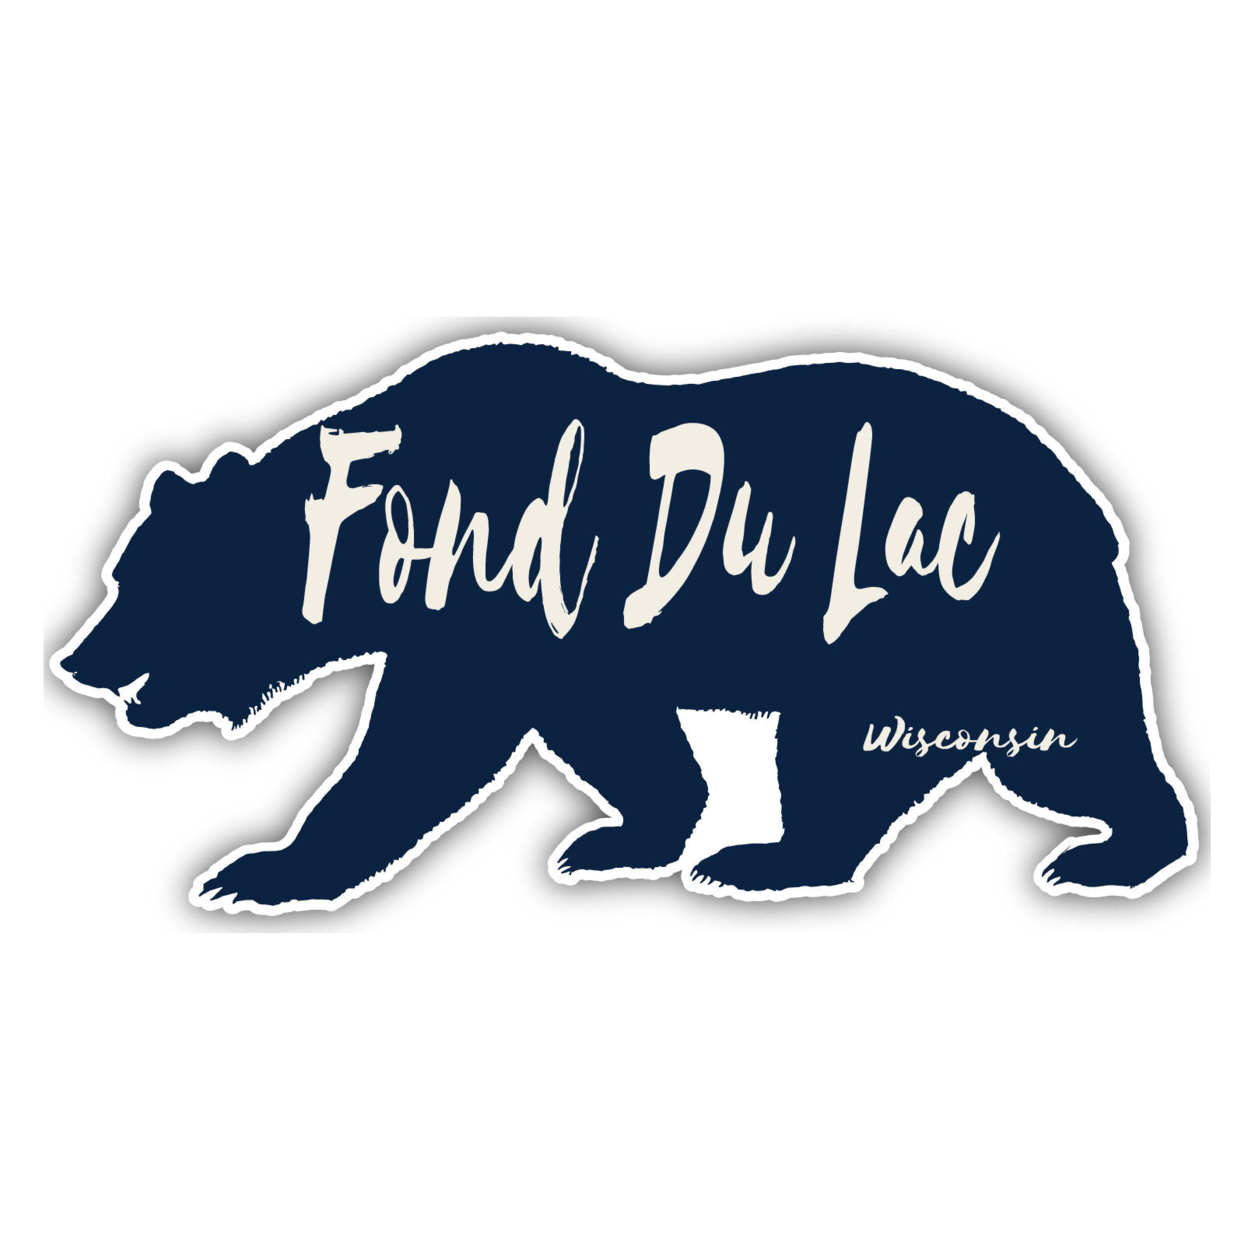 Fond Du Lac Wisconsin Souvenir Decorative Stickers (Choose Theme And Size) - 4-Pack, 10-Inch, Bear